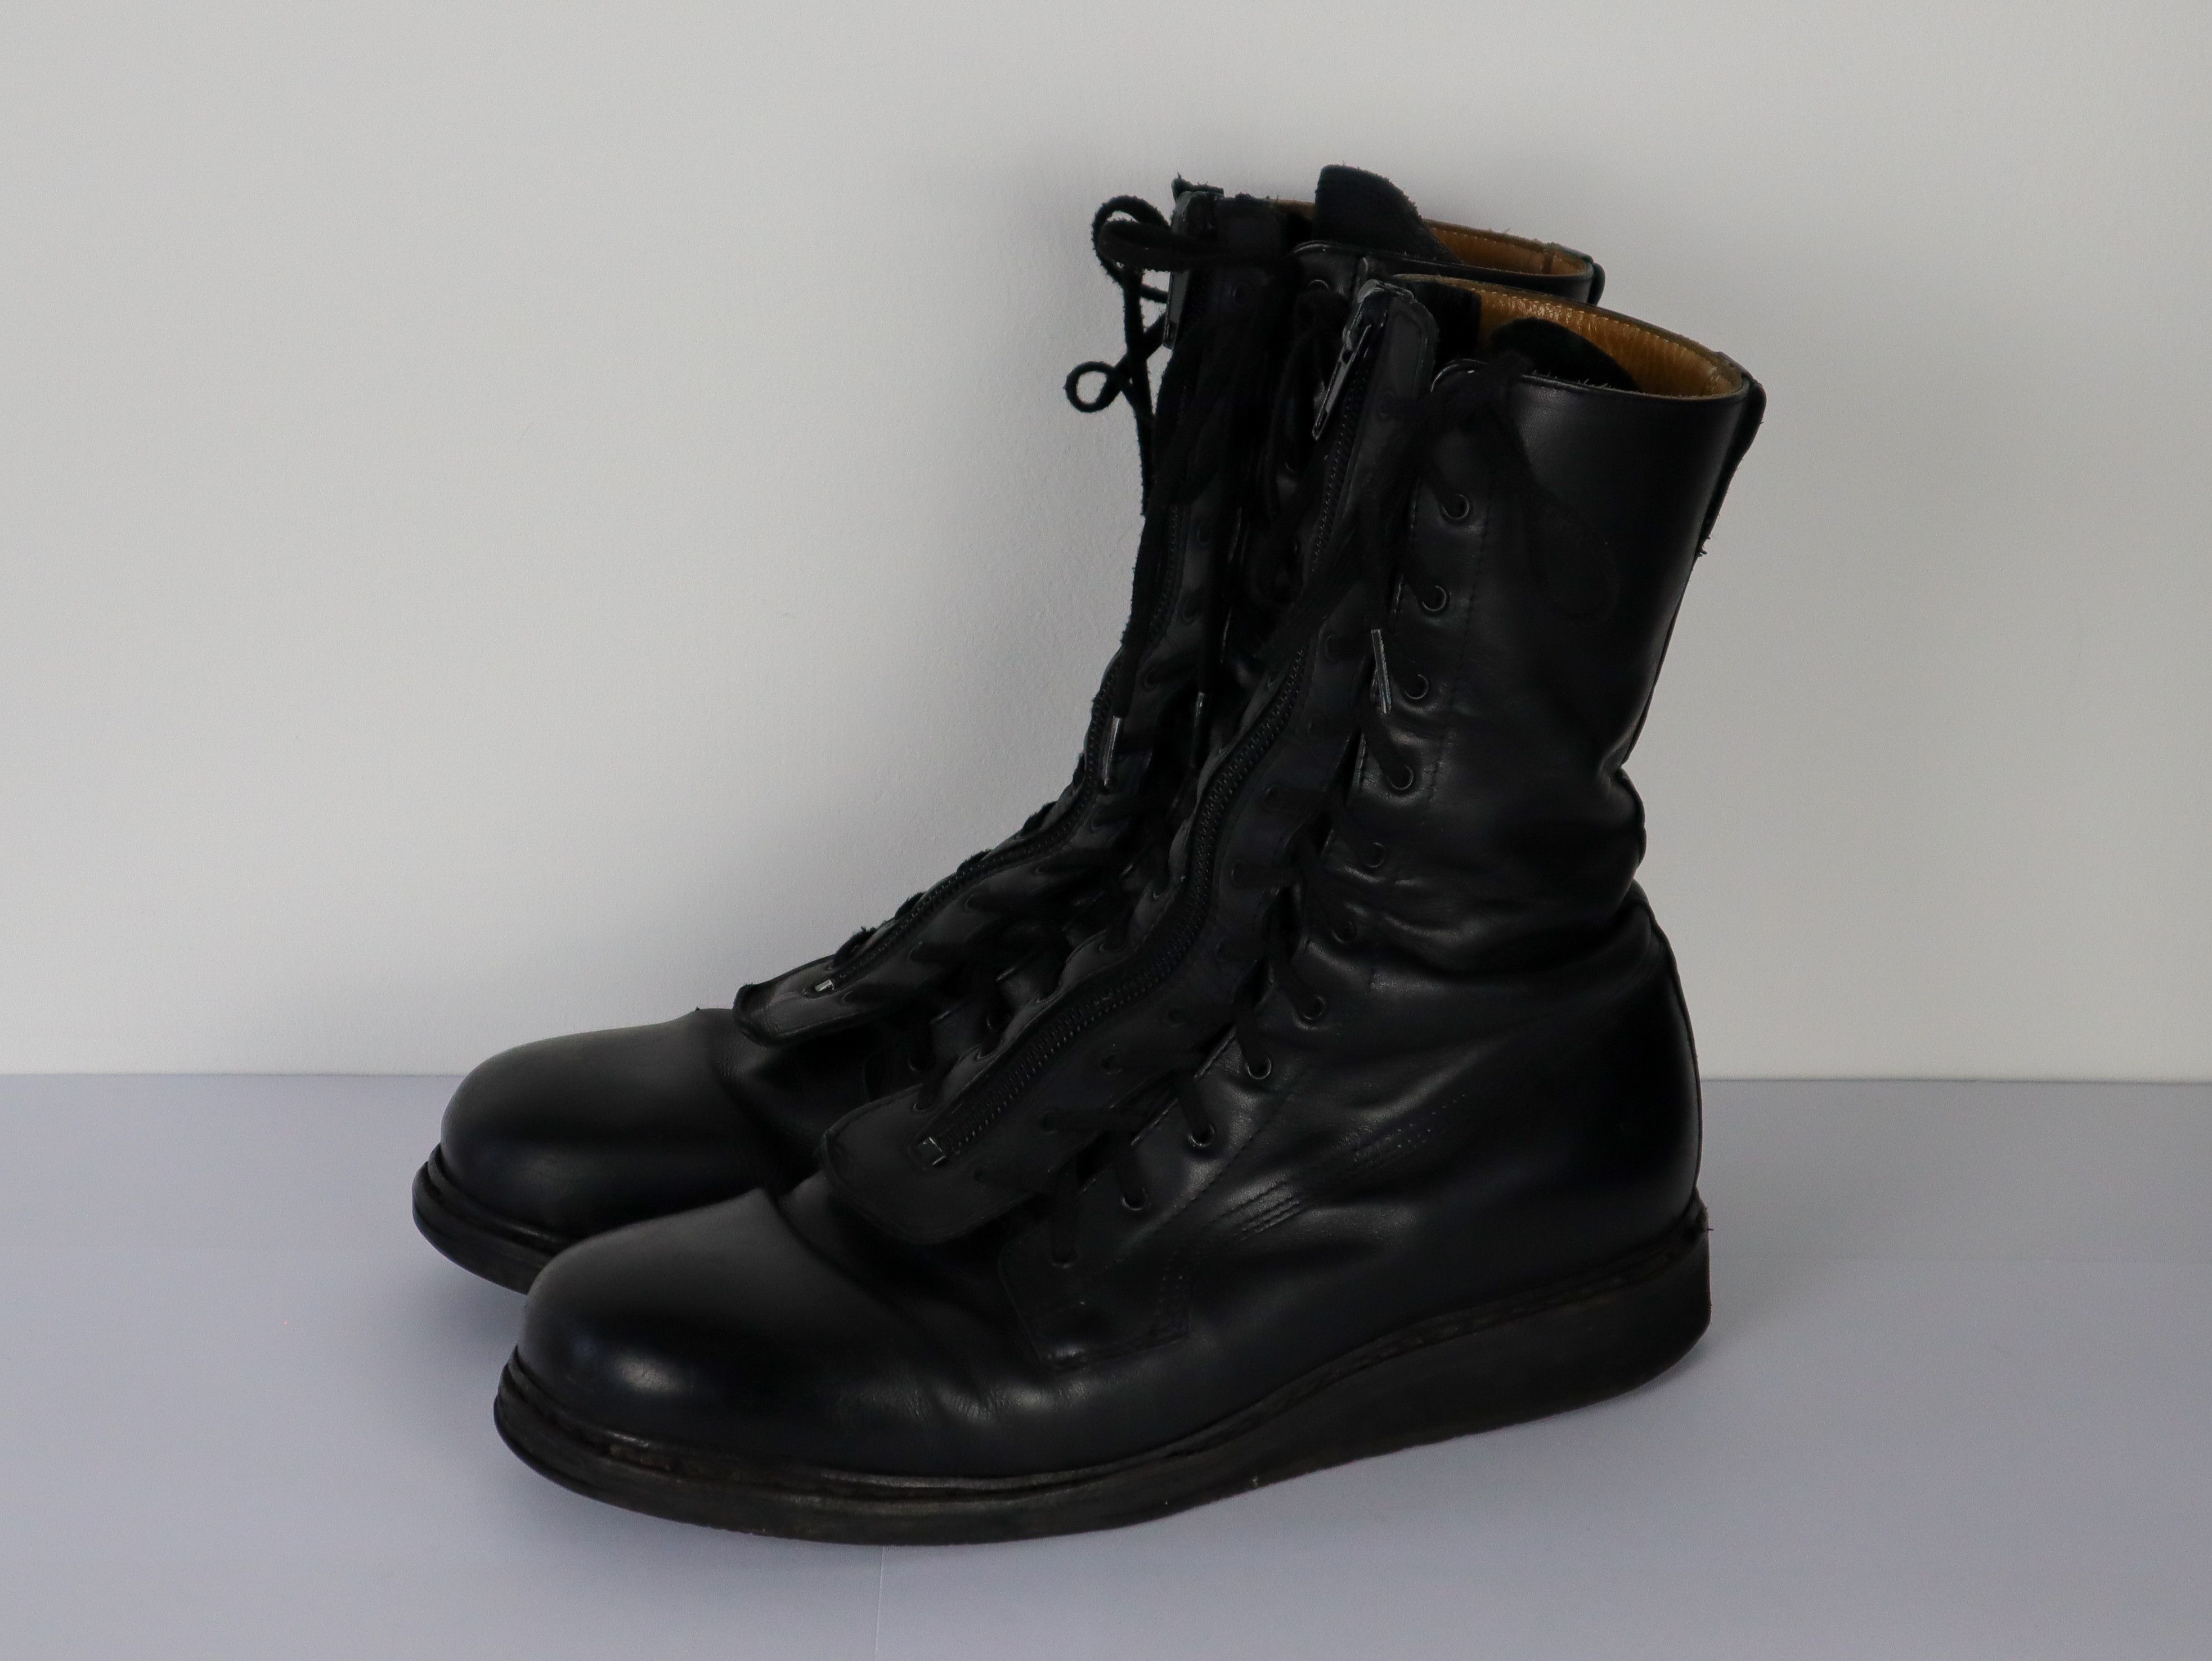 Vintage BW Pilot Boots Front Zipped Boots | Grailed